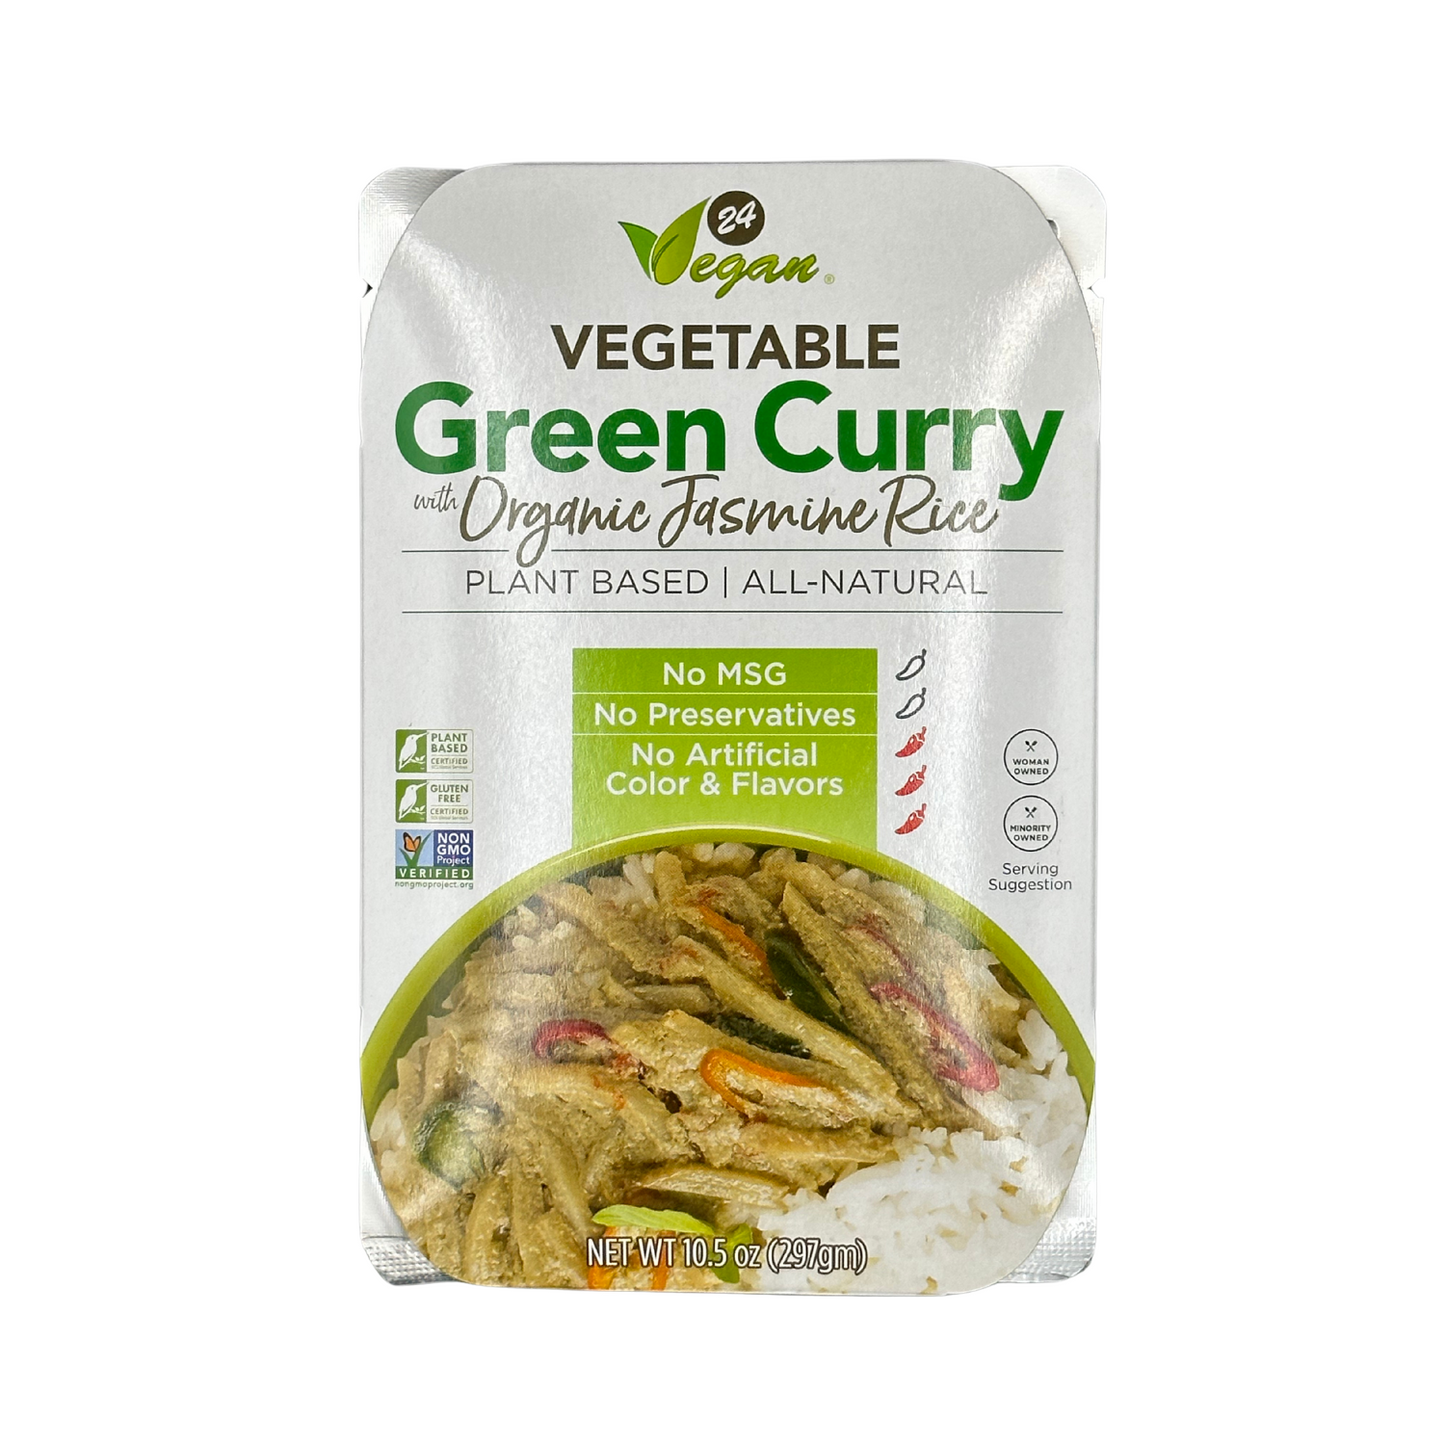 24Vegan Instant Meal Vegetable Green Curry with Organic Rice